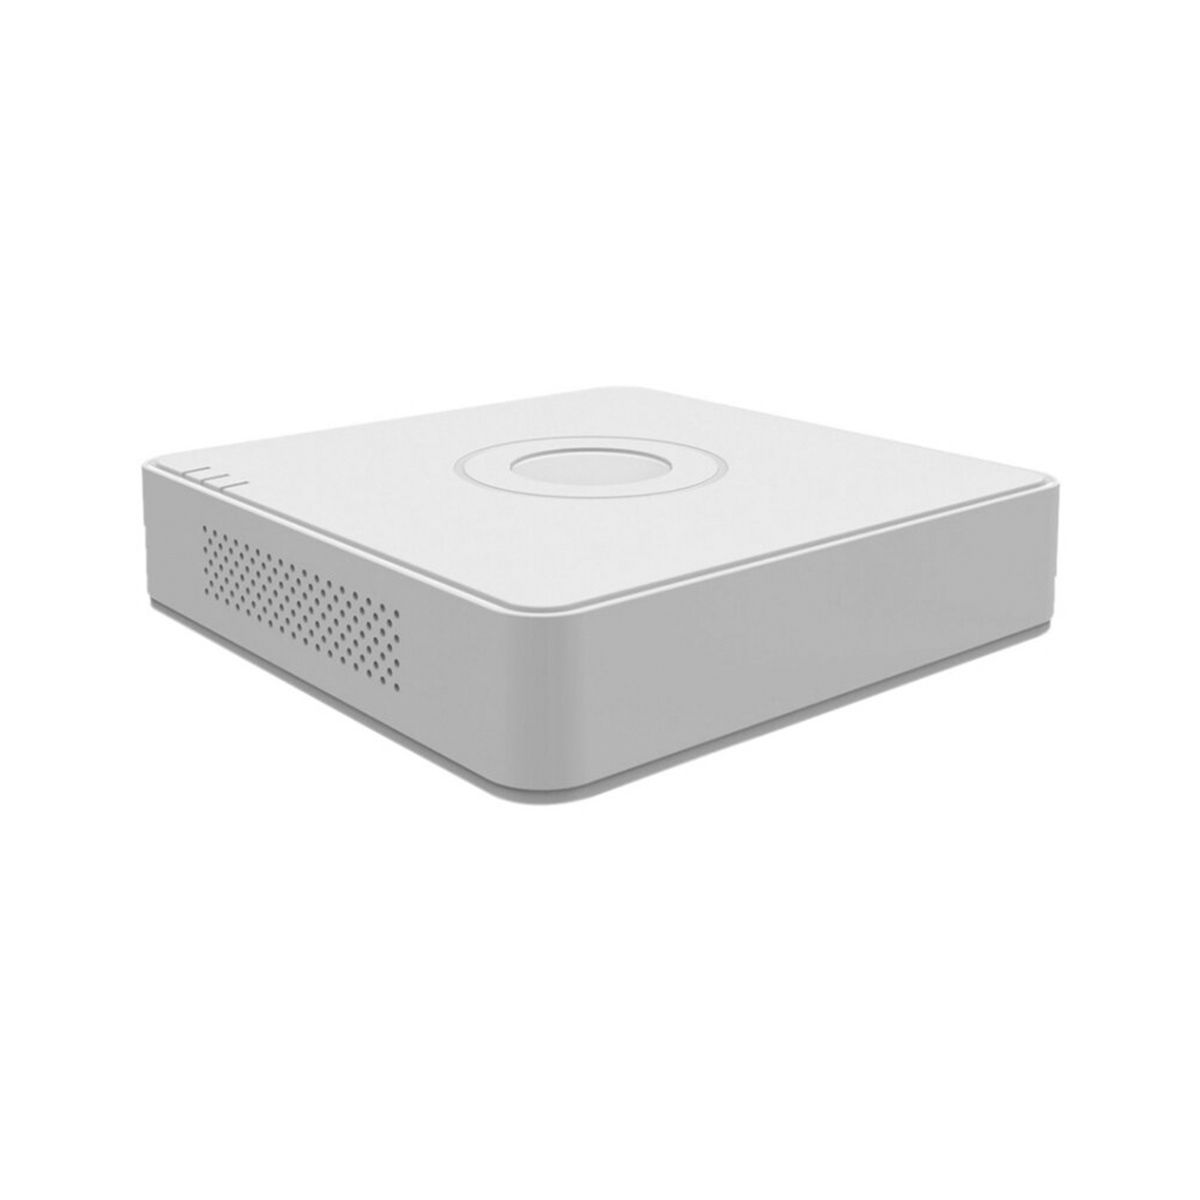 NVR Hikvision 8 canales DS-7108NI-E1